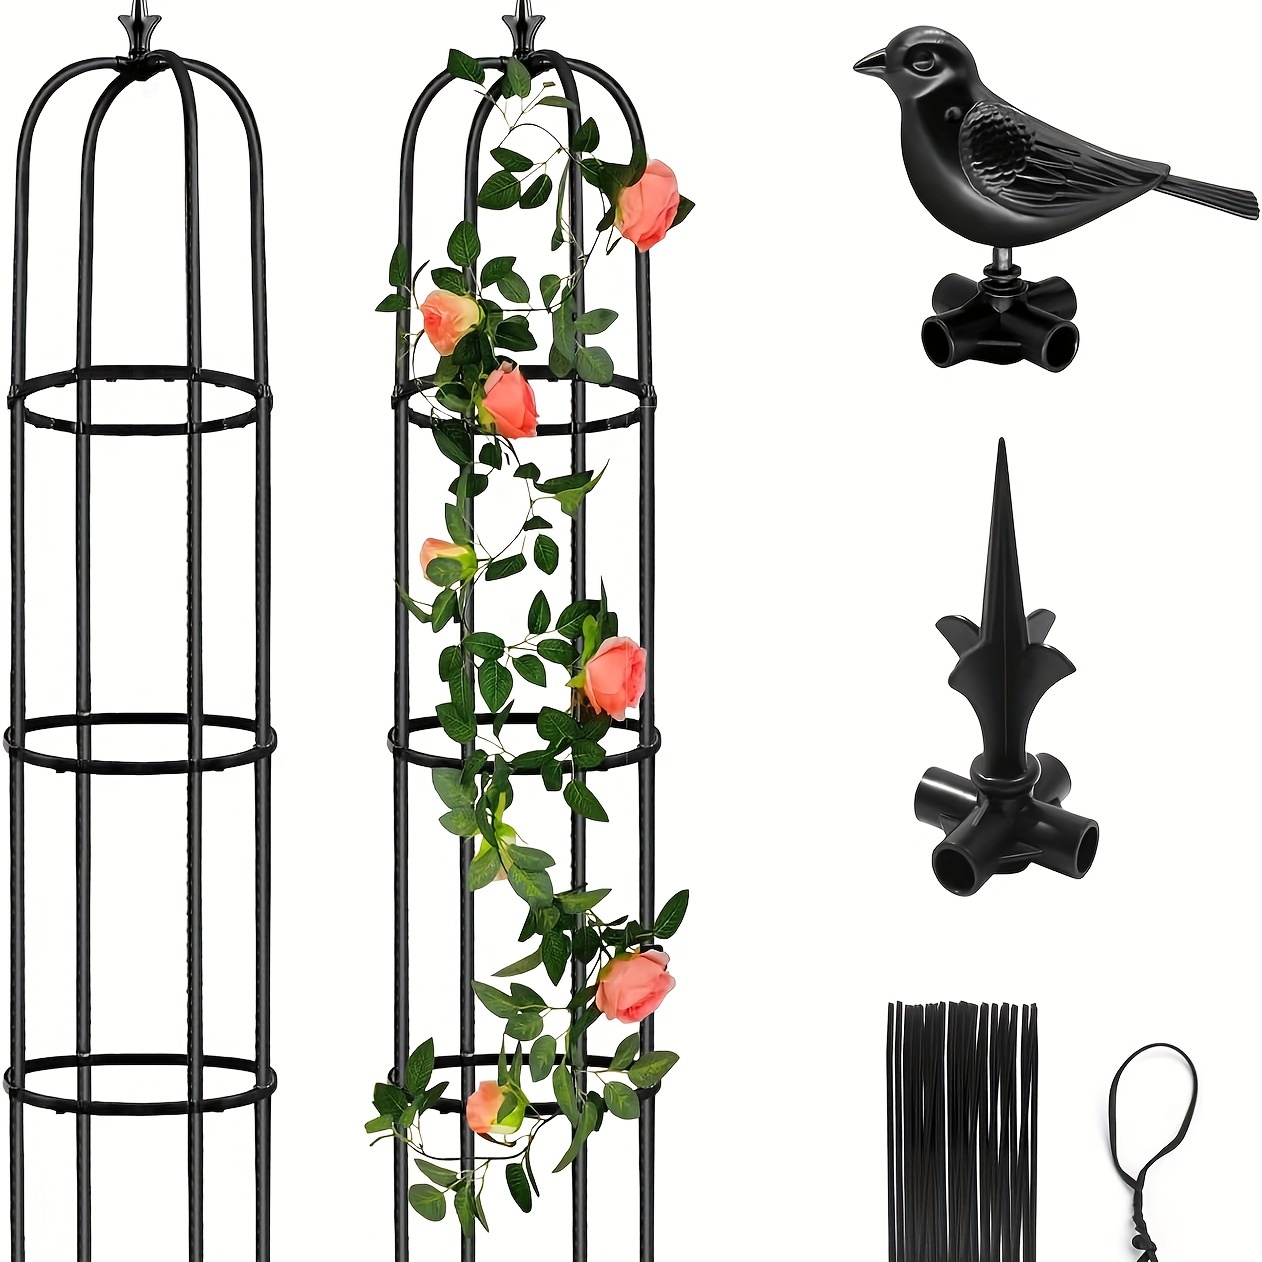 

Tower Obelisk Garden Trellis For Climbing Plant, 59inch Rustproof Metal Potted Plant Climbing Support For Indoor Outdoor Flowers Vegetable Fruits Vines Support (2pcs)